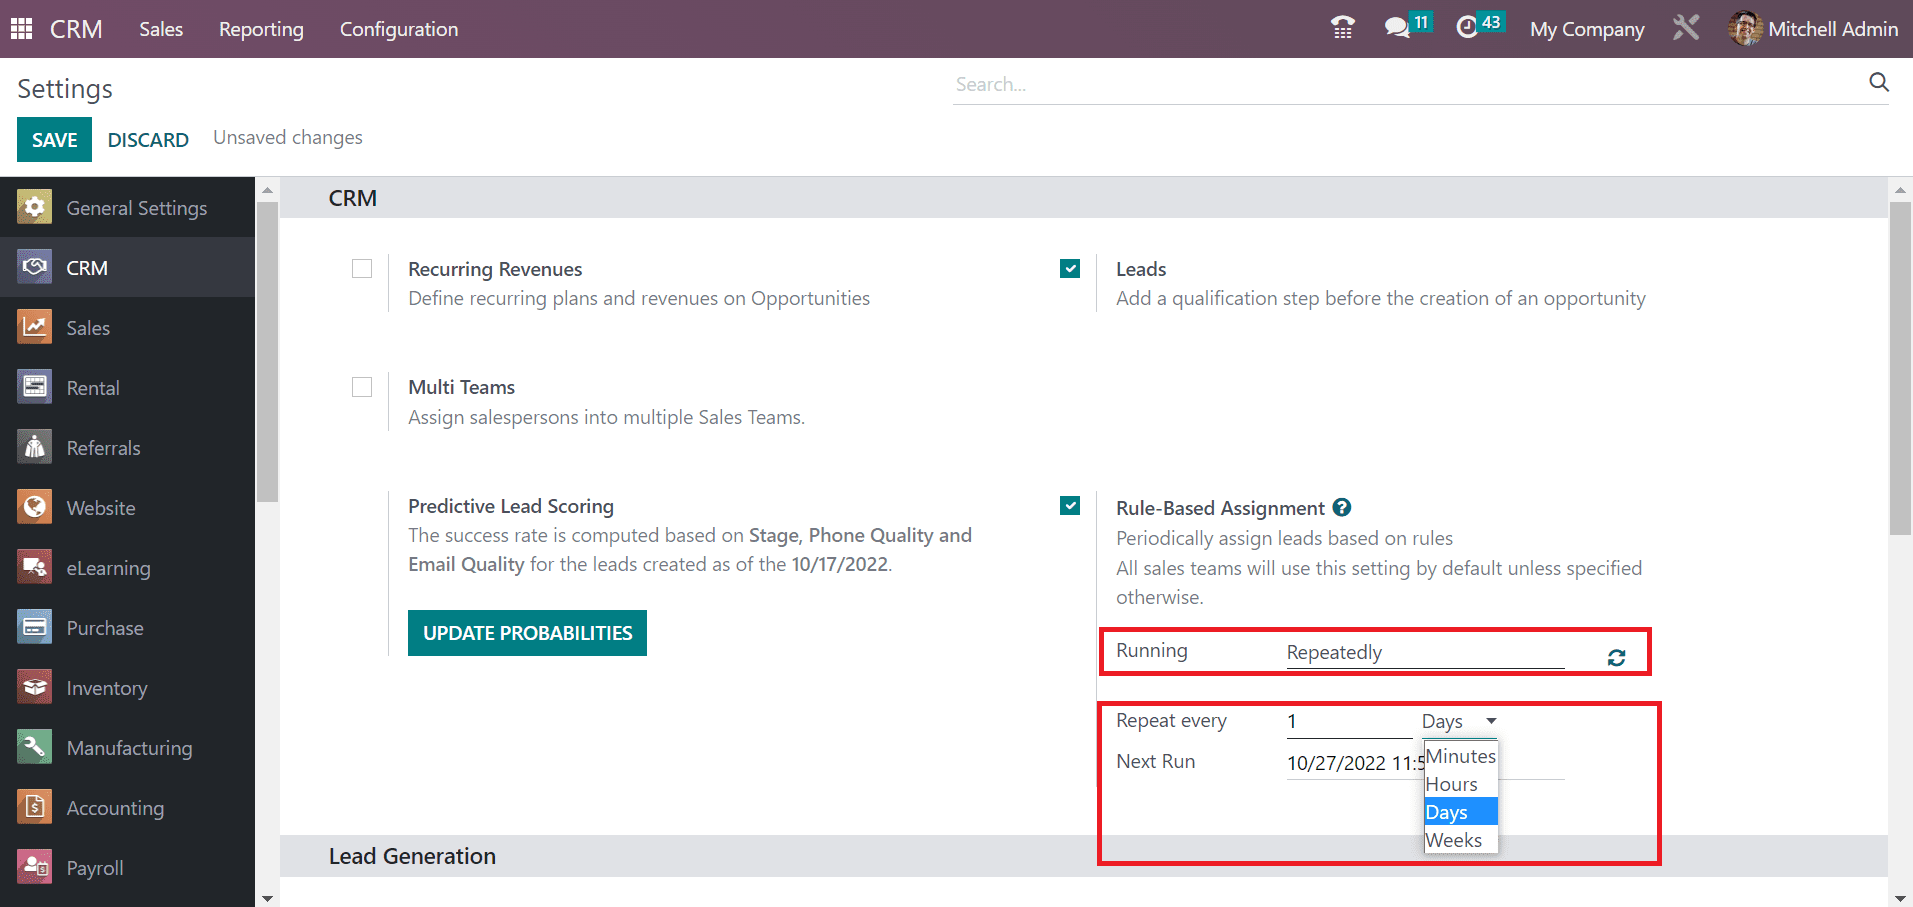 how-to-periodically-assign-leads-based-on-rules-in-odoo-16-crm-4-cybrosys